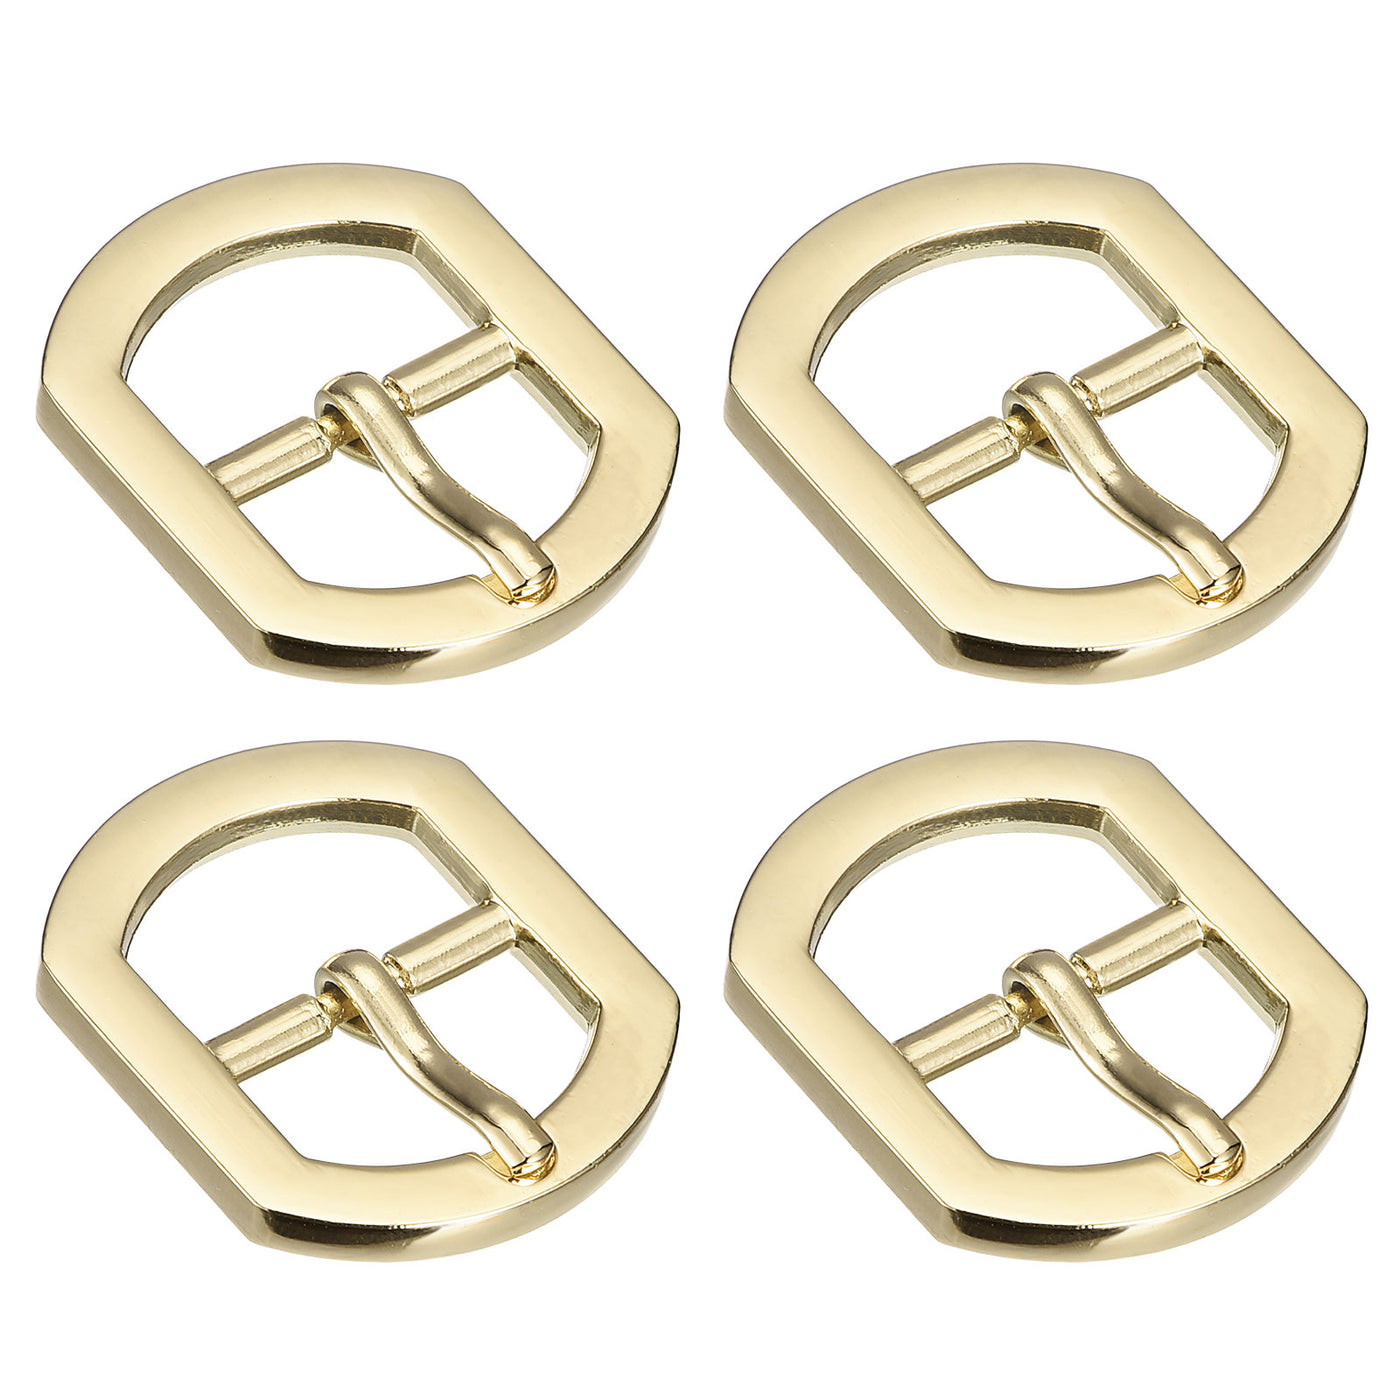 uxcell Uxcell 4Pcs 0.75" Single Prong Belt Buckle Square Center Bar Buckles for Belt, Gold